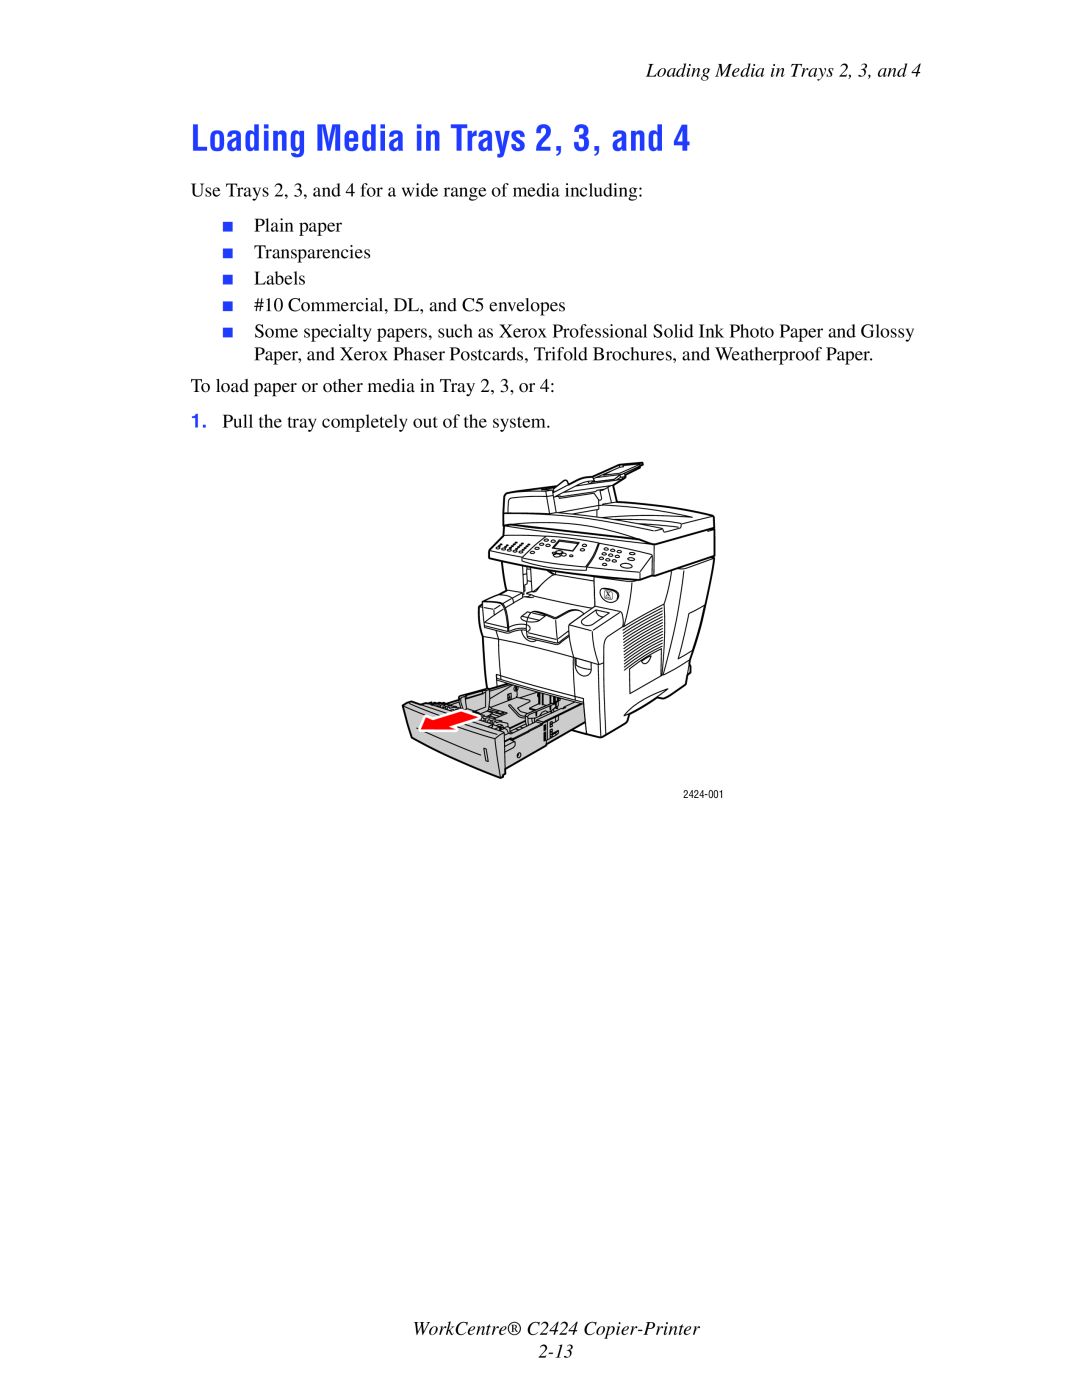 Xerox manual Loading Media in Trays 2, 3, and, WorkCentre C2424 Copier-Printer 